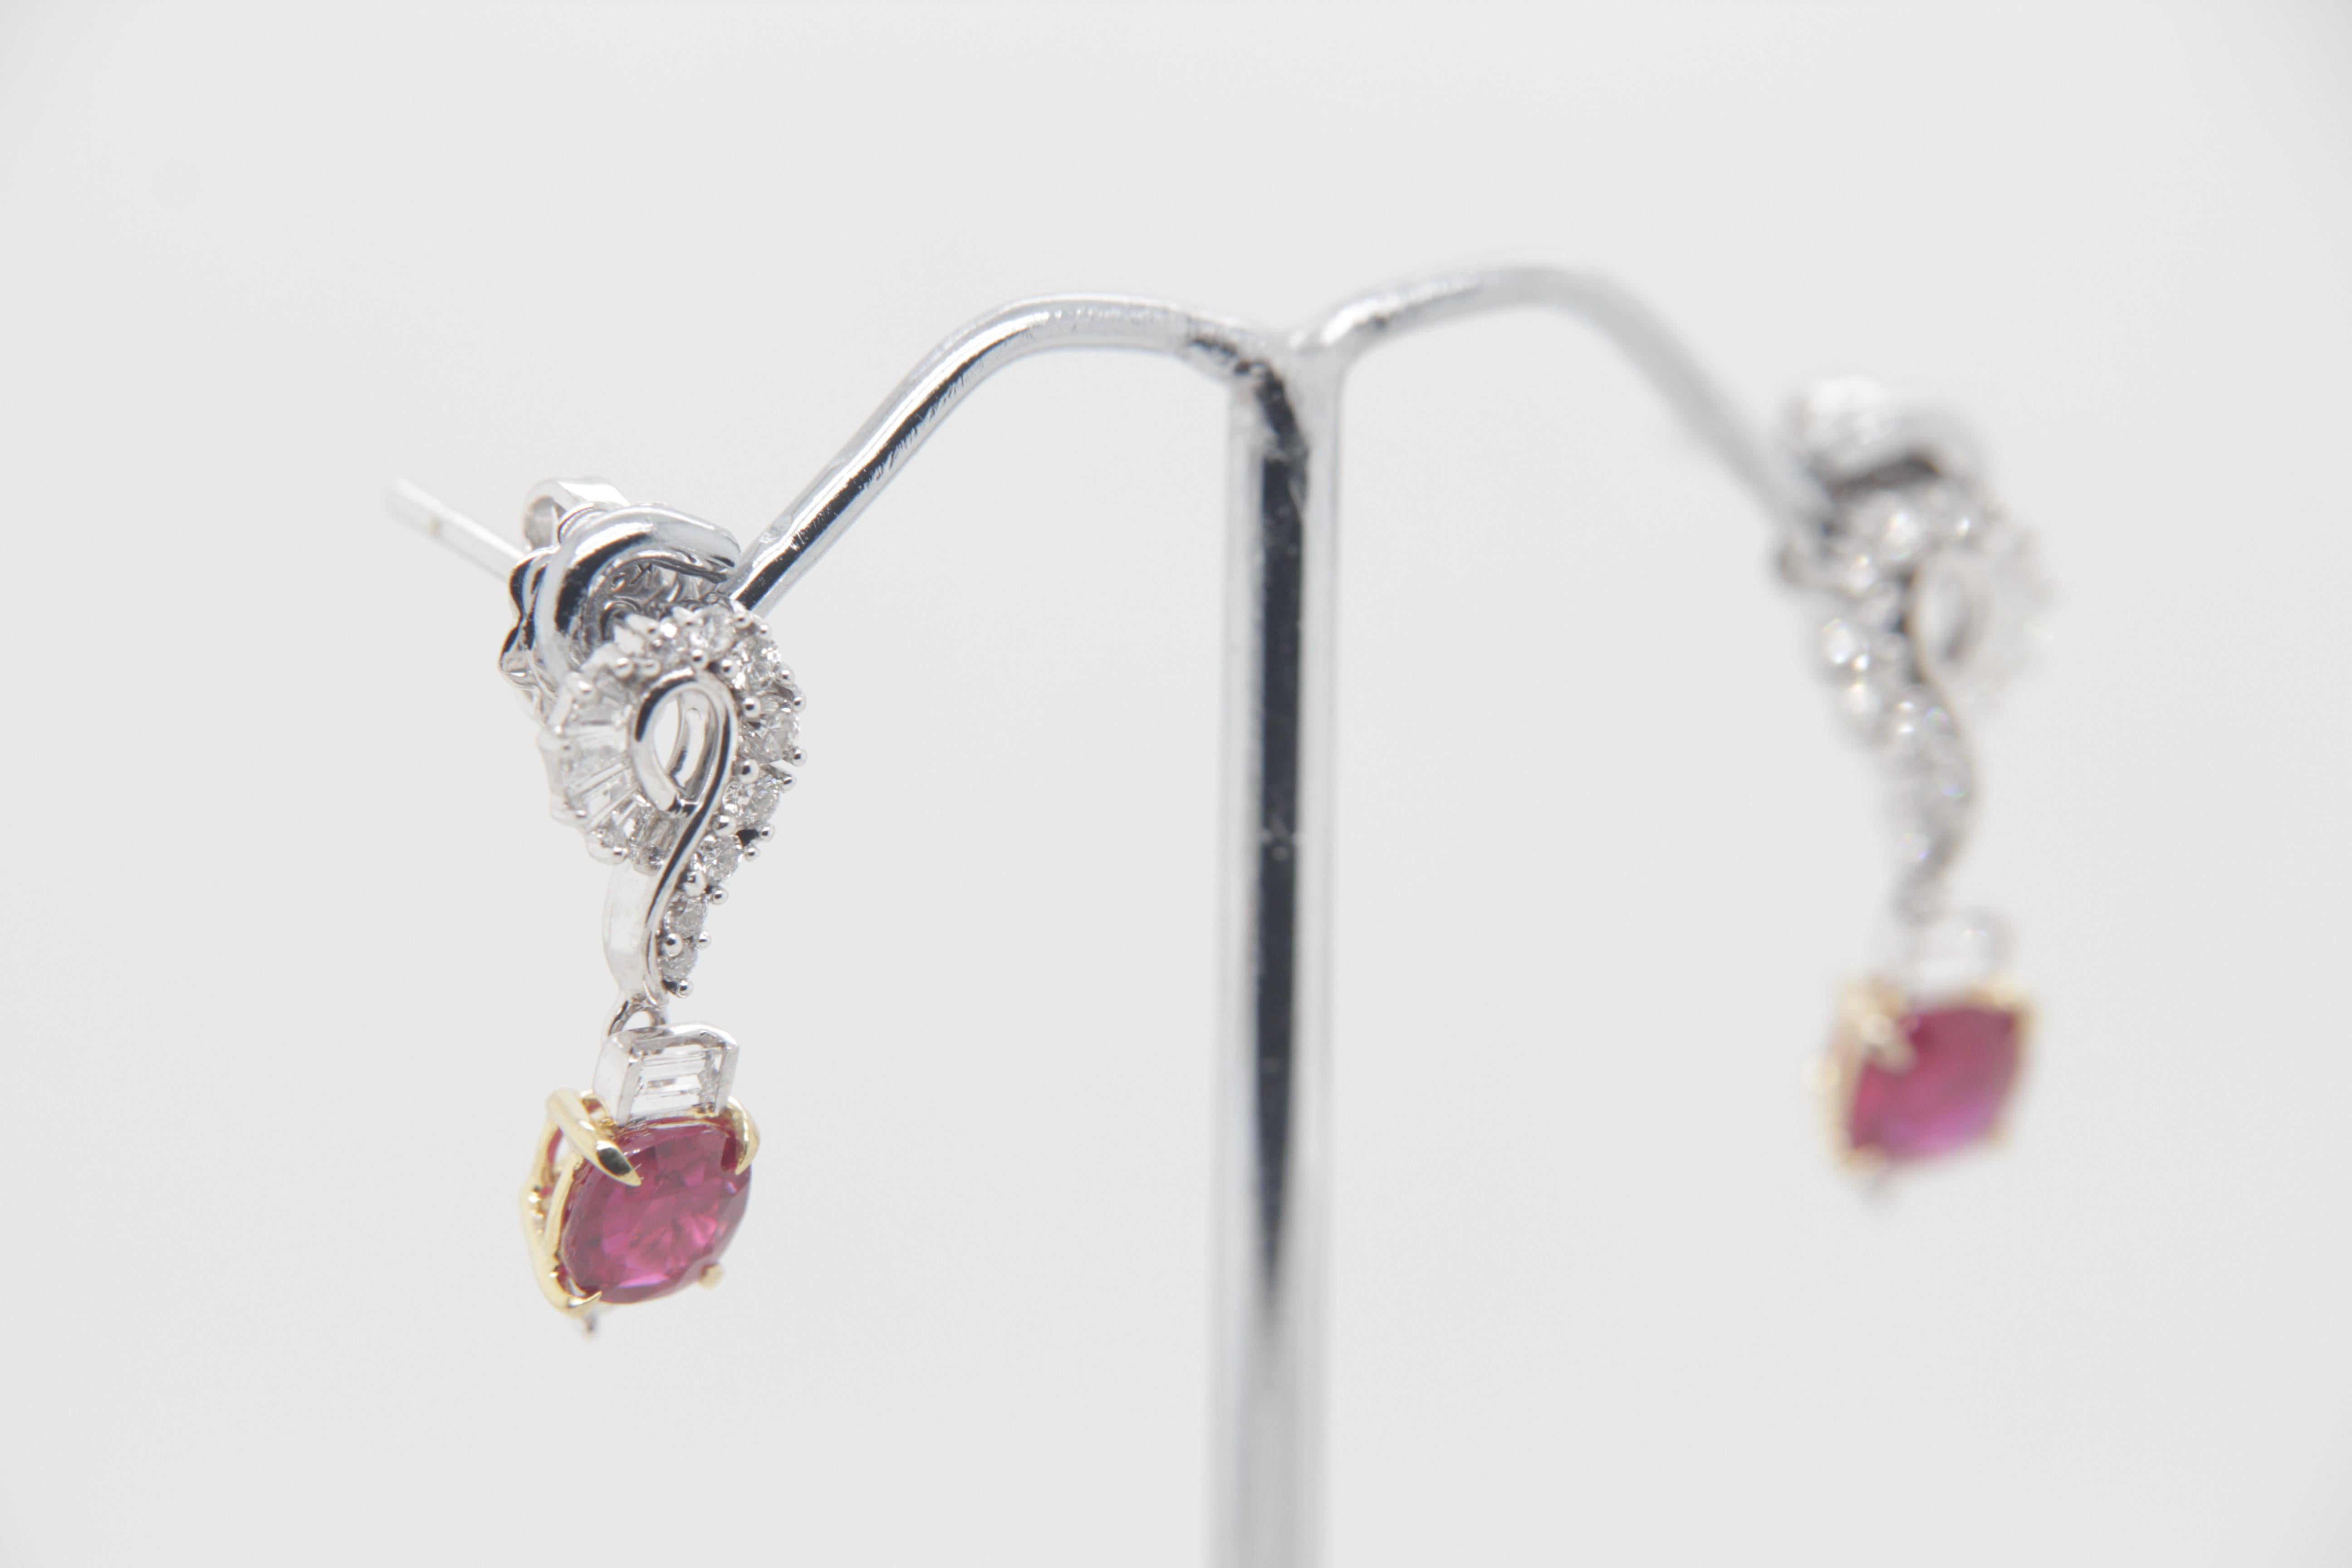 A new 1.47 carat Burmese ruby earring mounted with diamonds in 18 Karat gold. The ruby weighs 0.64 and 0.83 carats and are certified by Gem Research Swisslab (GRS) as natural, no heat, and 'Vivid Red Pigeon's Blood'. The total diamond weight is 0.48